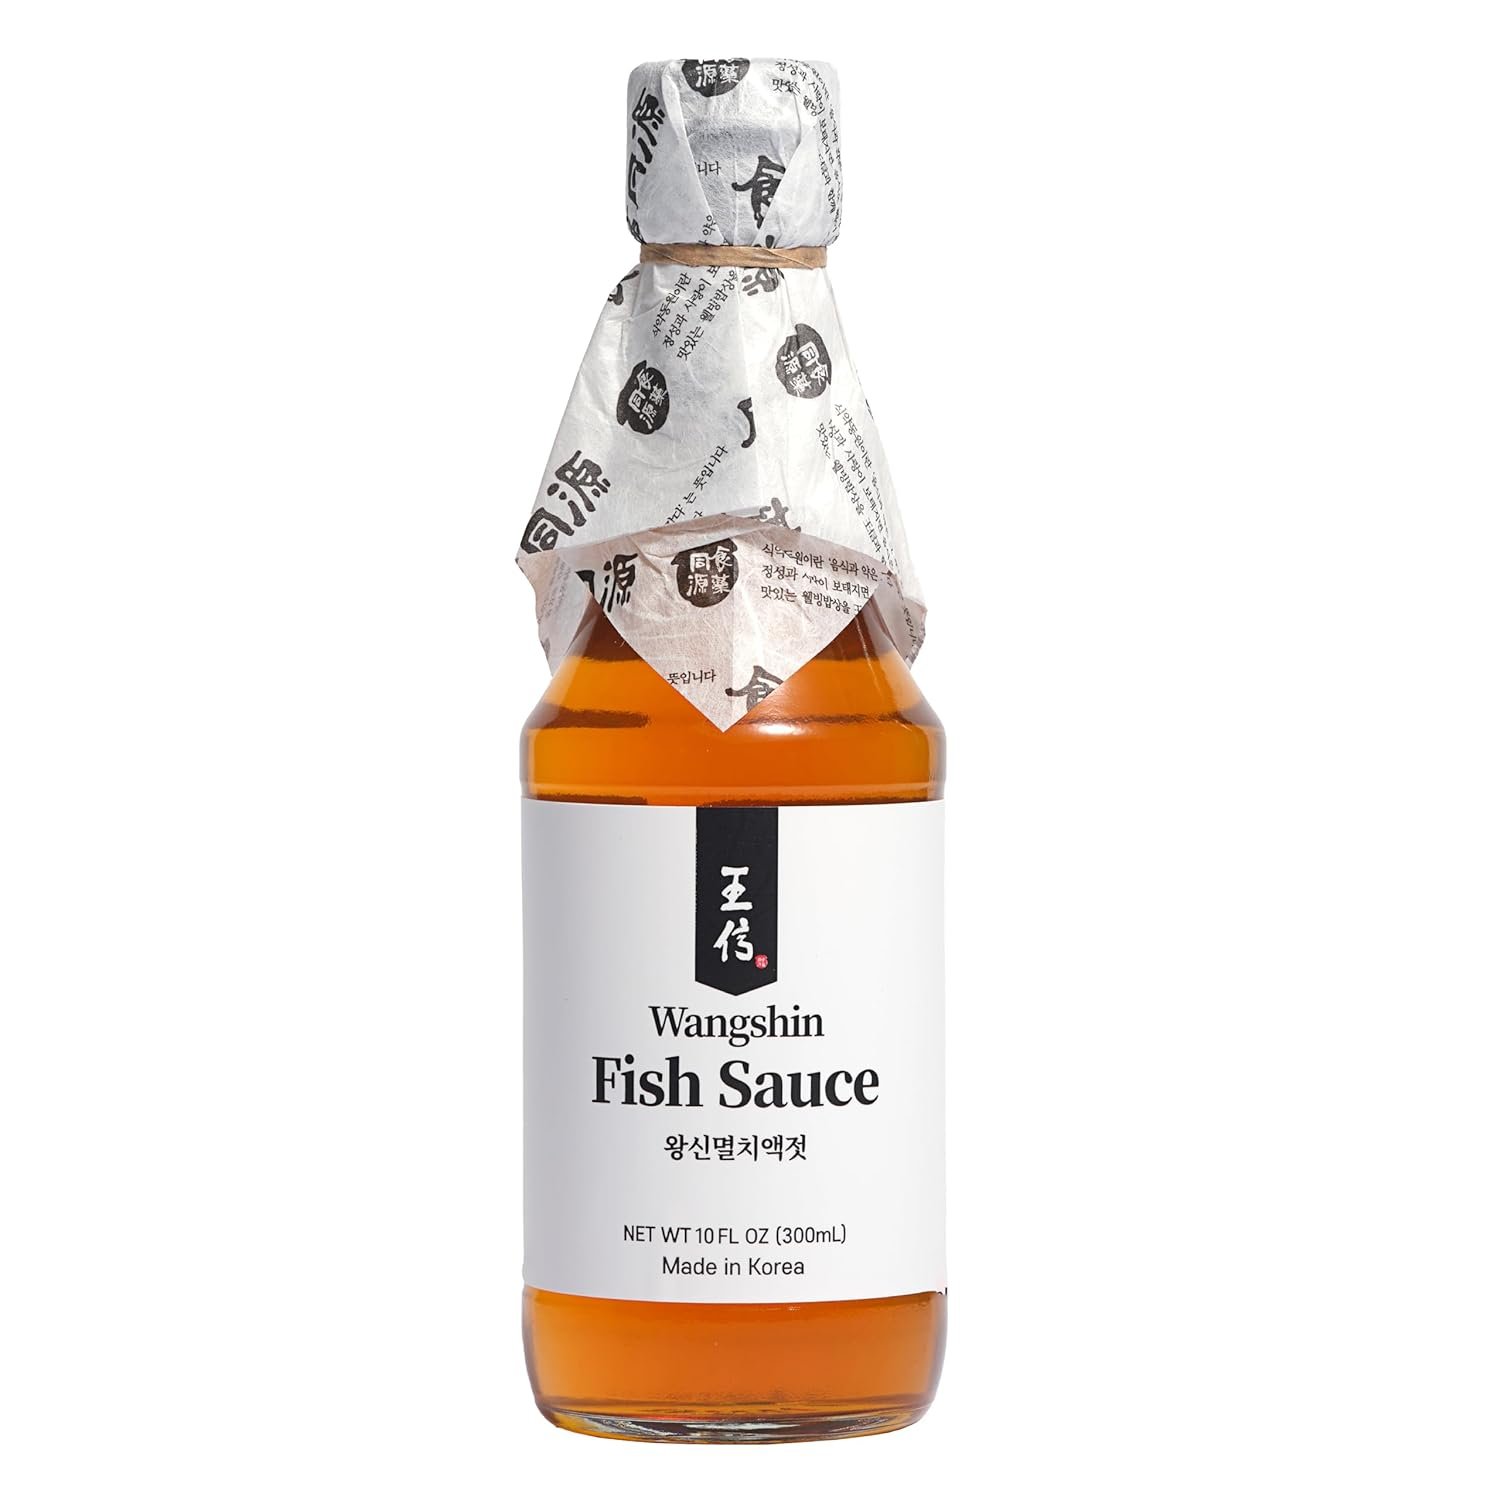 Wangshin Smoked Fish Sauce (5 fl oz/Aged 2 years) - Anchovy and Salt Fermented in a Korean Traditional Clay Pot